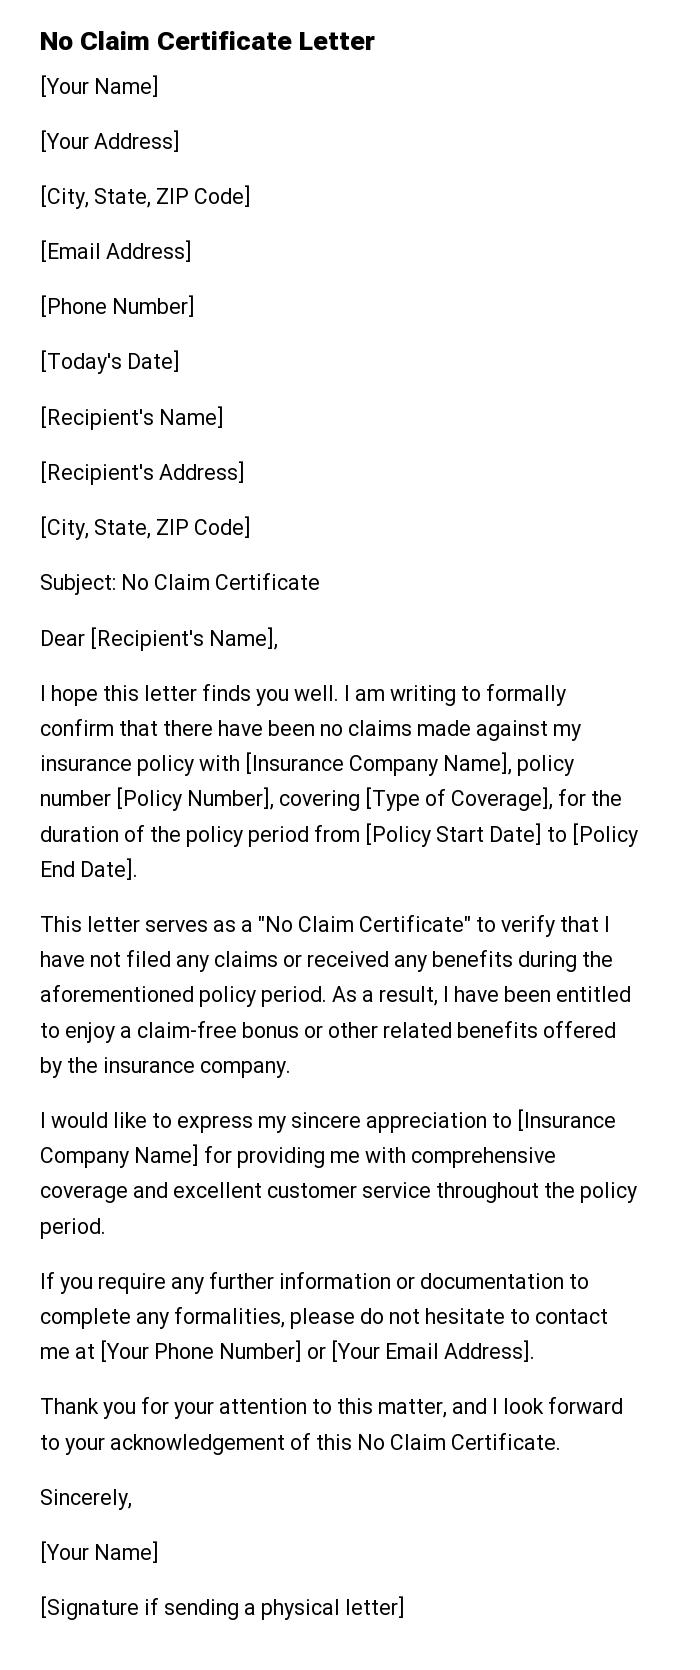 No Claim Certificate Letter